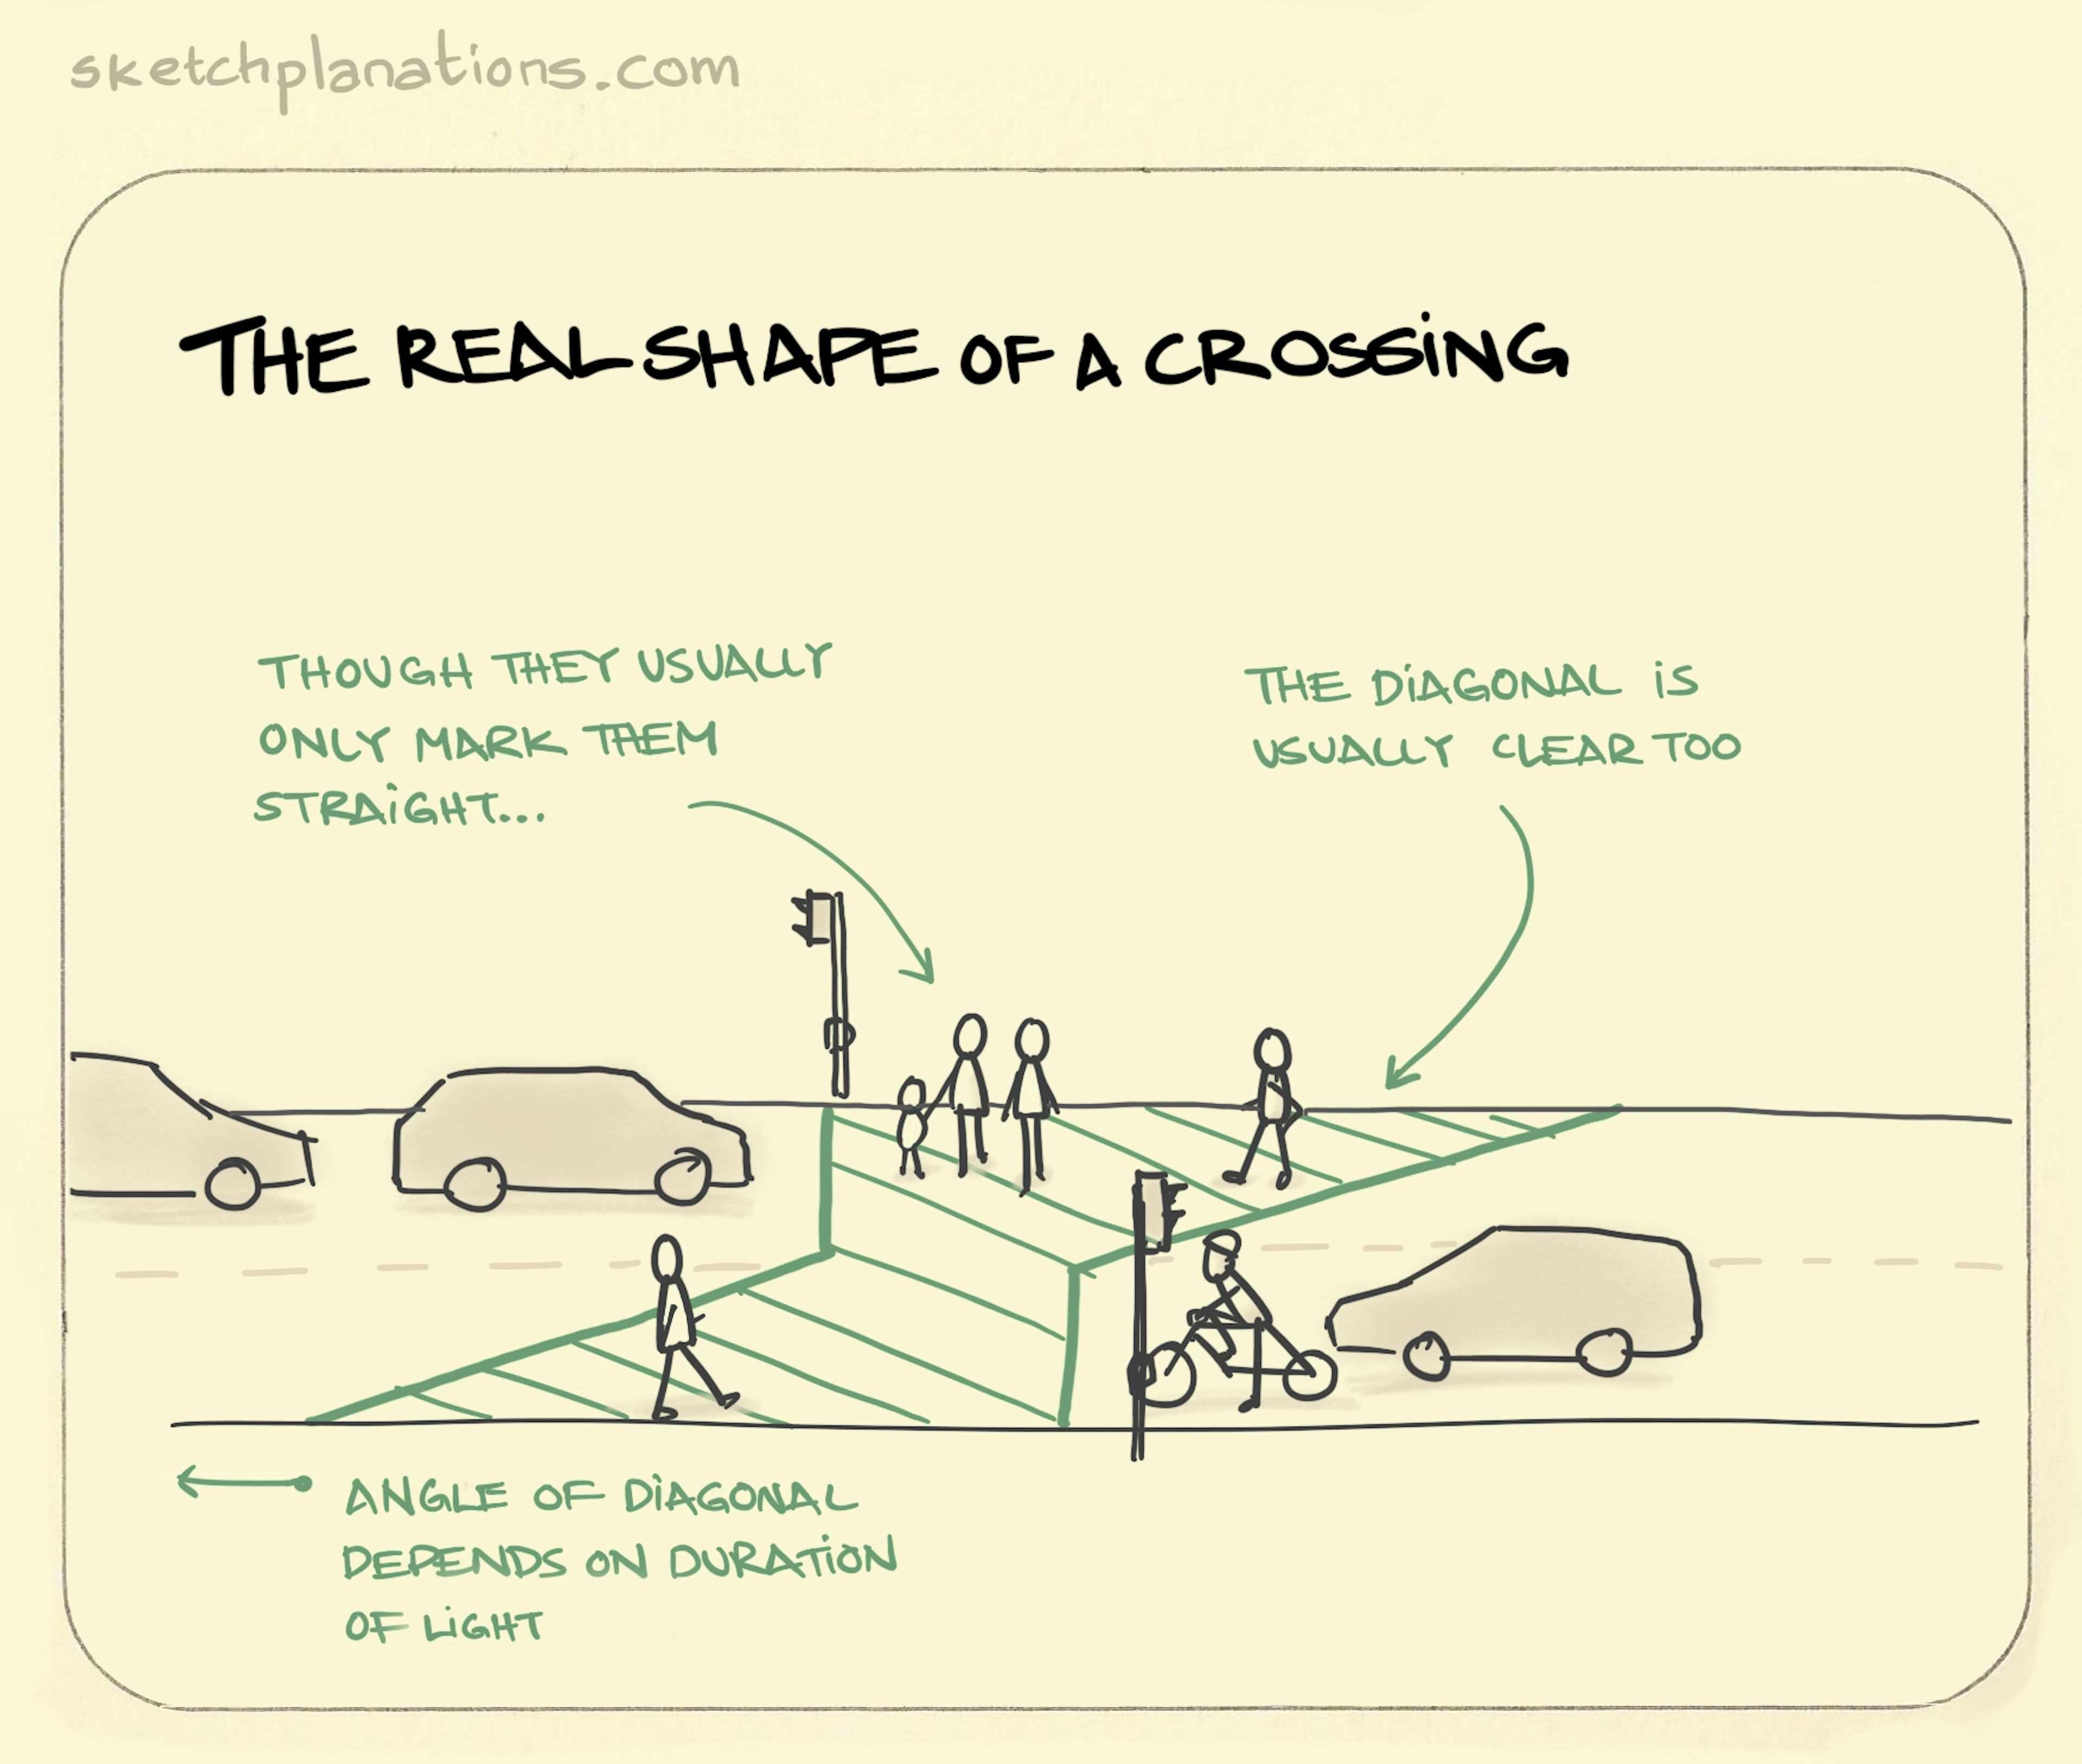 The real shape of a crossing illustration: as cars and a cyclist stop at a red light for pedestrians to cross the road, we see that people on foot start crossing before they reach the designated crossing area that is typically perpendicular to the road. 